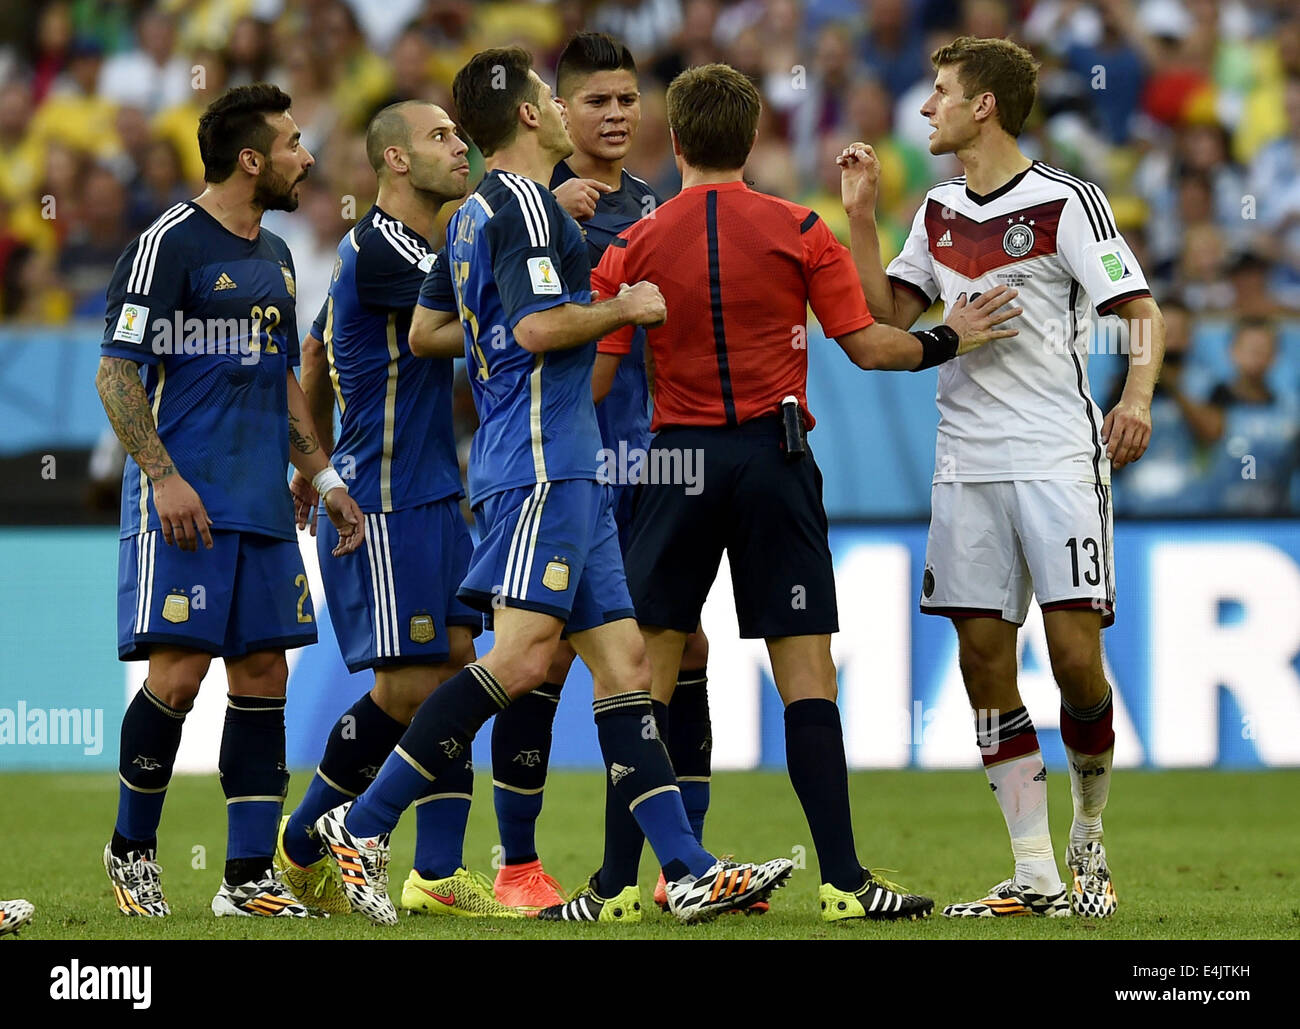 Rio De Janeiro, Brazil. 13th July, 2014. Italy's referee Nicola Rizzoli (2nd R) interrupts an arguement between Germany's Thomas Muller (1st R) and Argentina's players during the final match between Germany and Argentina of 2014 FIFA World Cup at the Estadio do Maracana Stadium in Rio de Janeiro, Brazil, on July 13, 2014. Credit:  Qi Heng/Xinhua/Alamy Live News Stock Photo